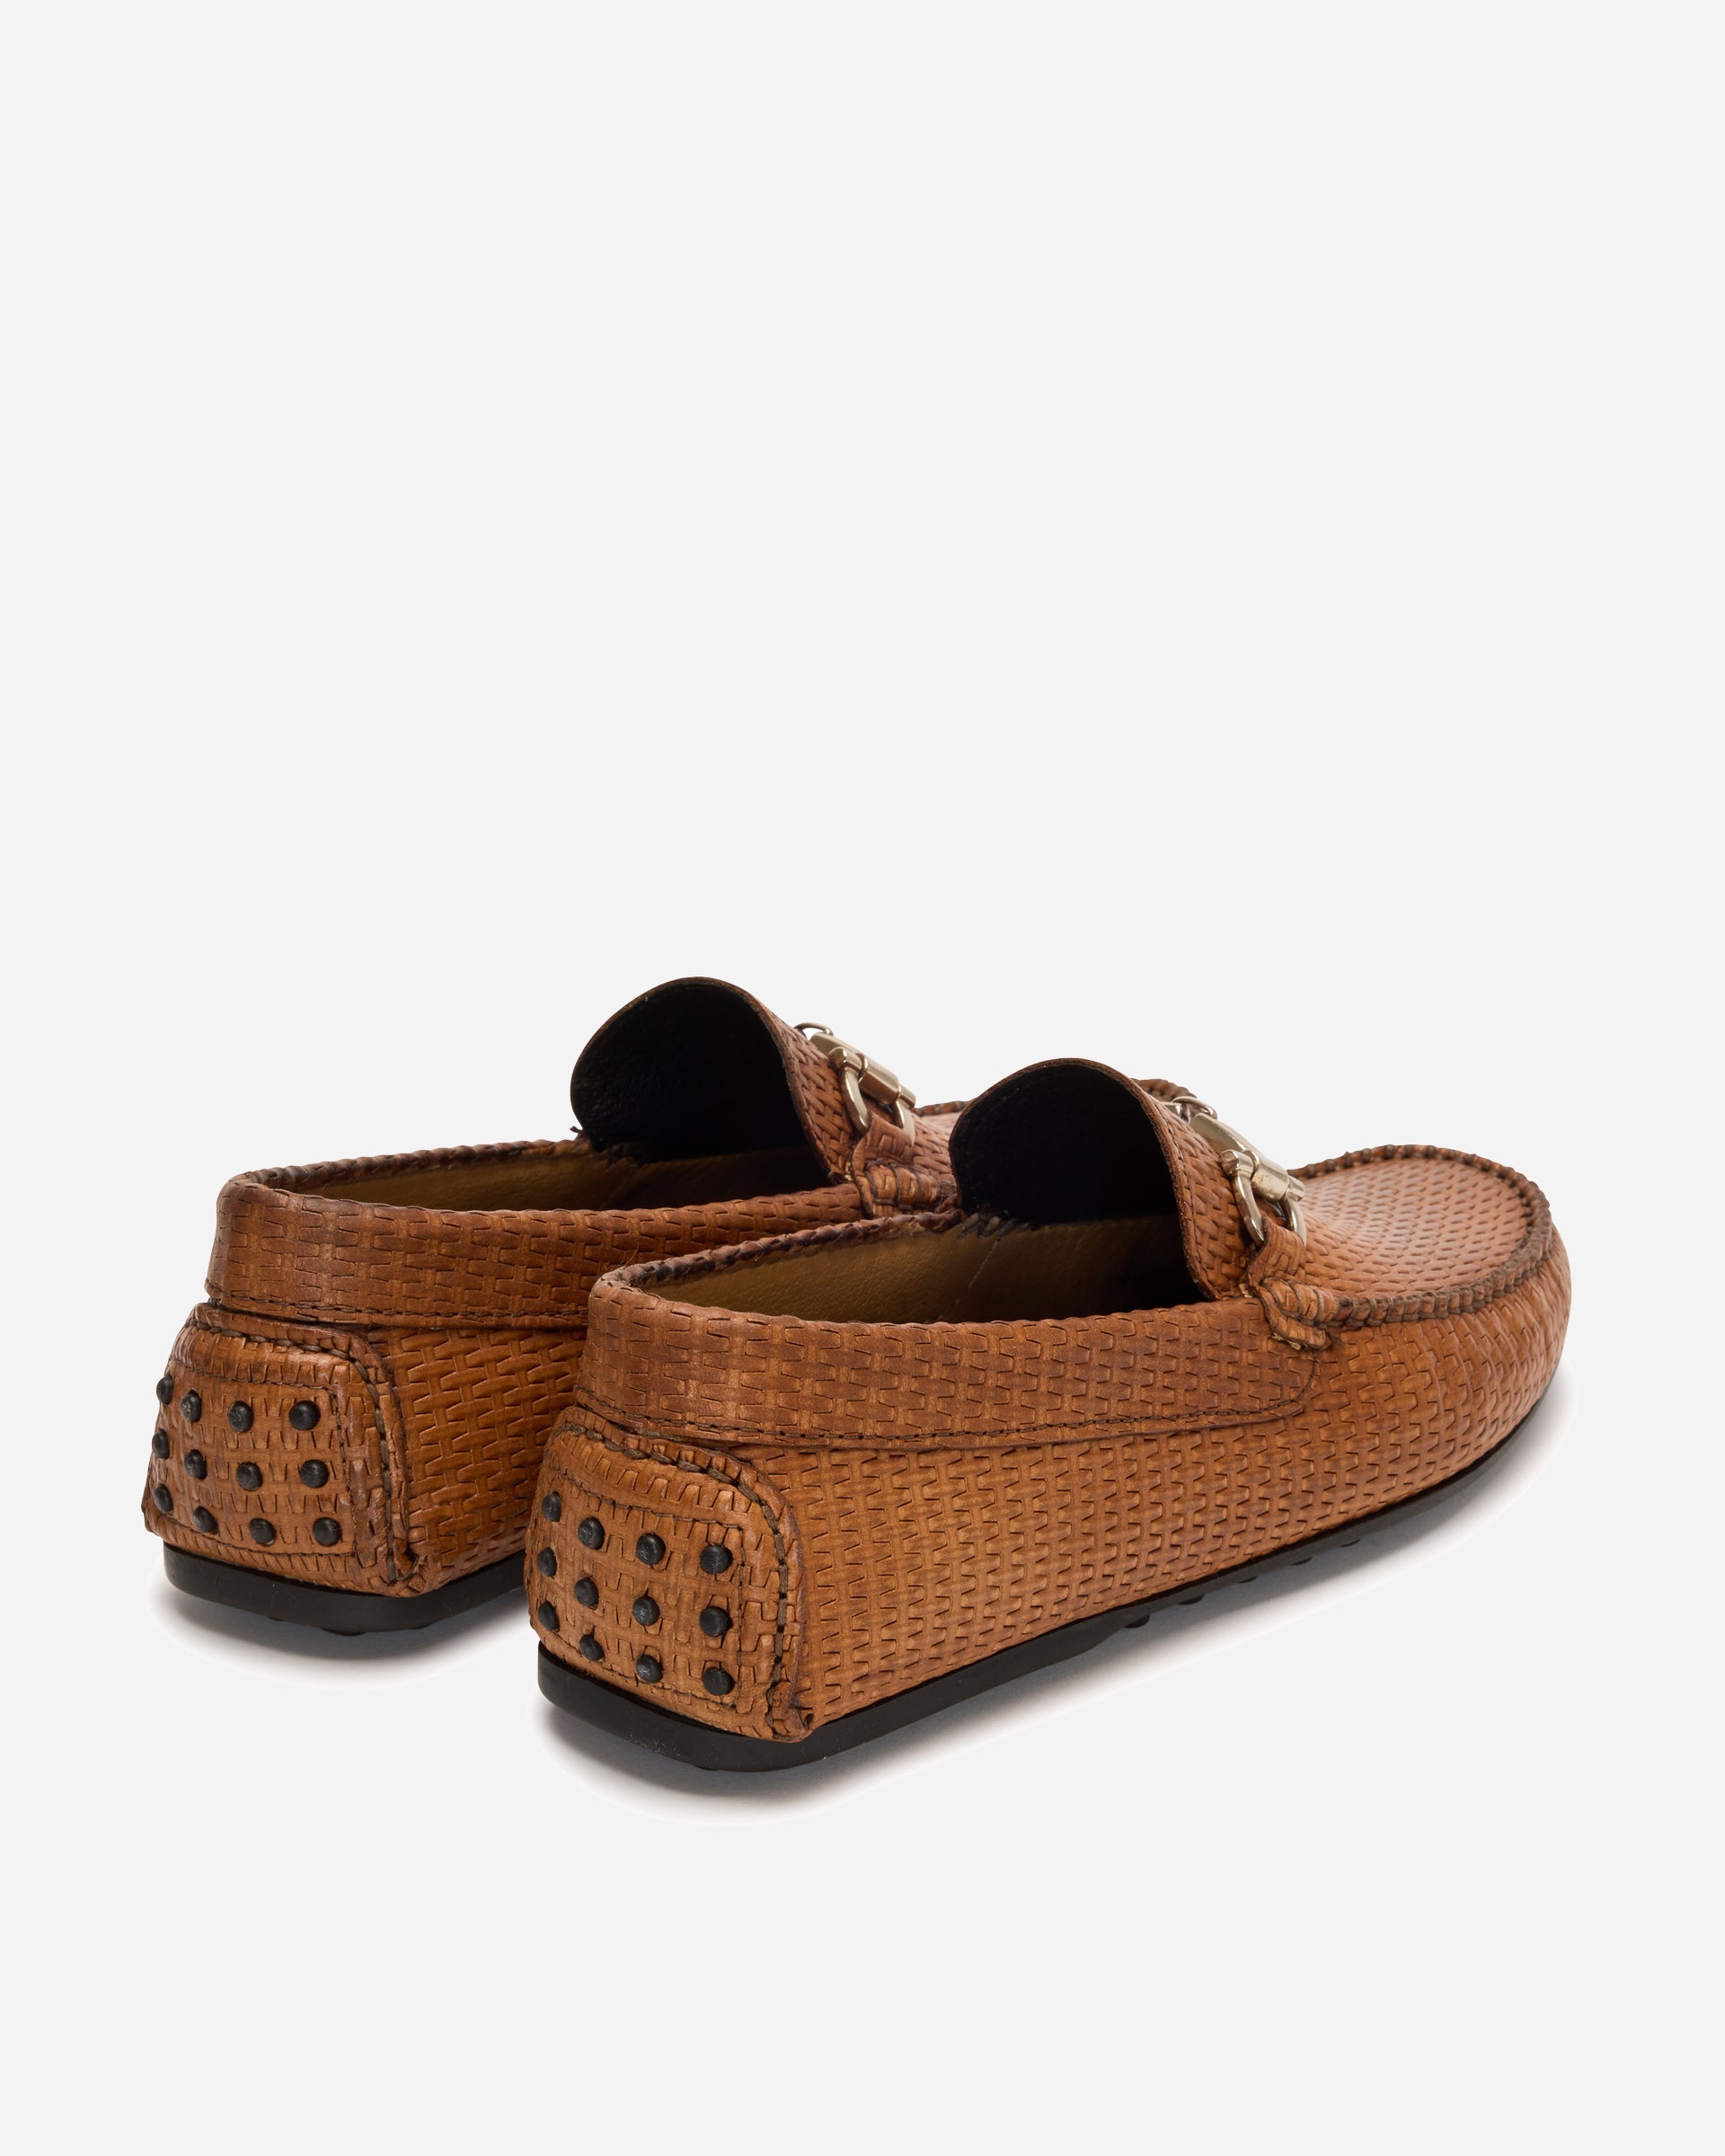 Acri Stampa Bit Loafer - Men's Loafers at Menzclub